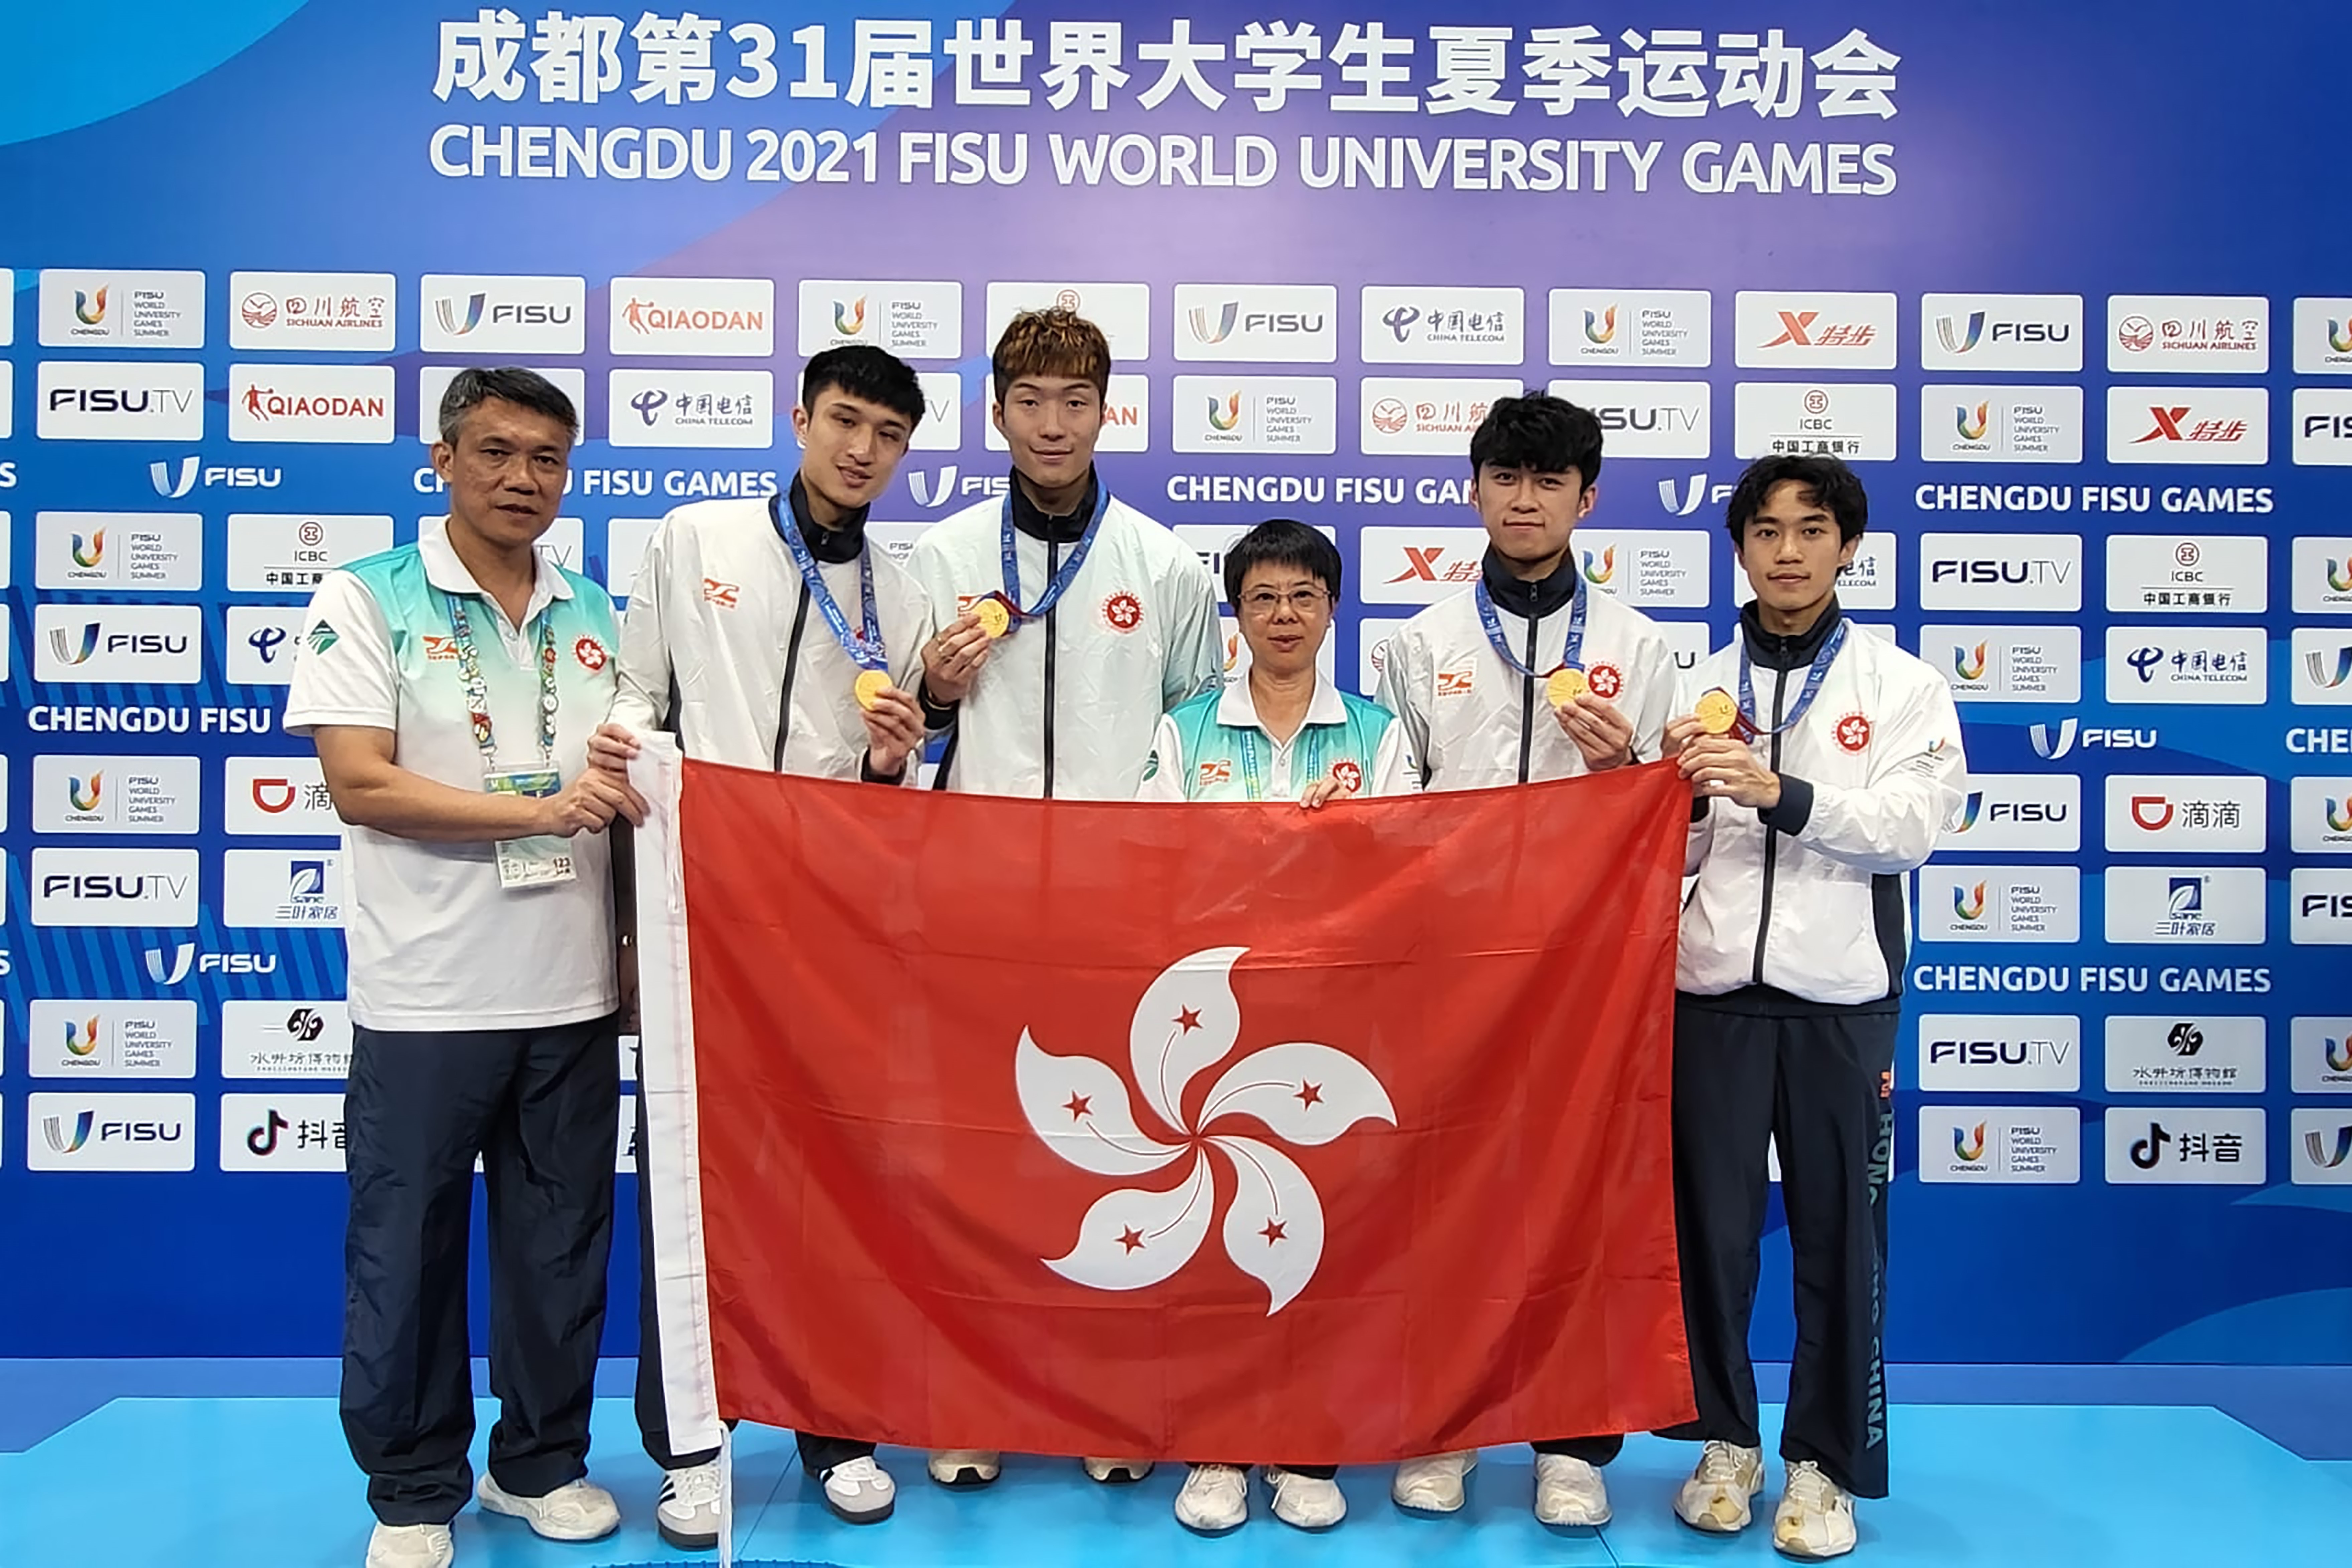 Cheung Ka-long  (third left) and his teammates win the gold medal in the Men’s Foil Team final at the FISU World University Games.